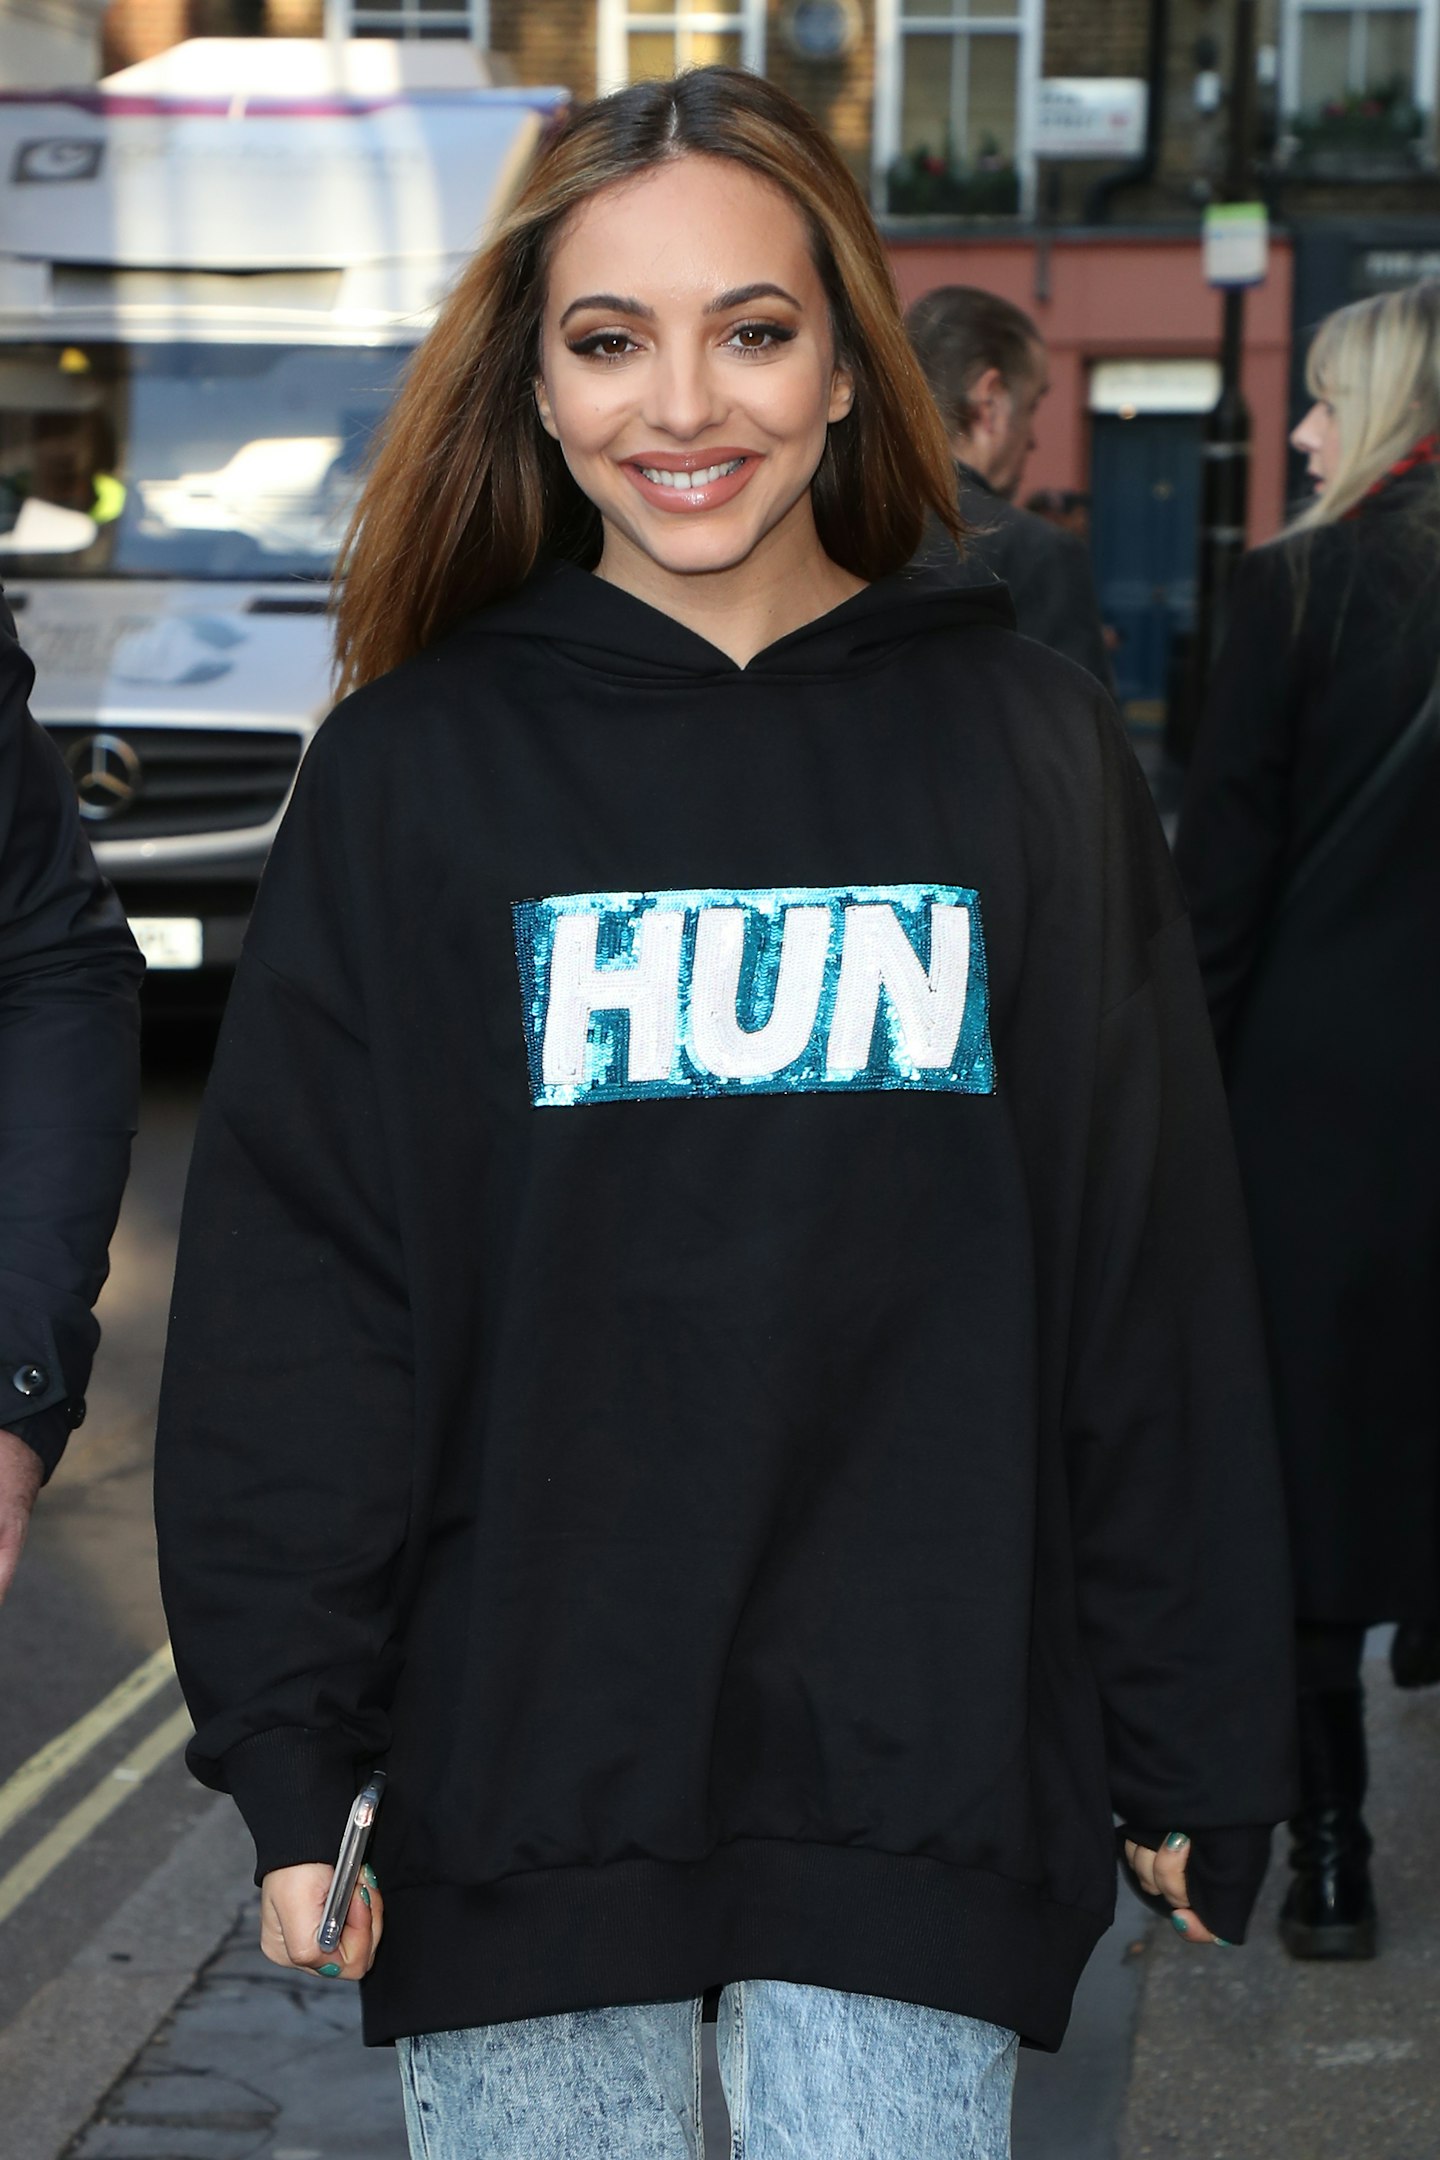 Jade Thirlwall from Little Mix seen arriving at KISS FM UK radio studios on December 04, 2019 in London, England